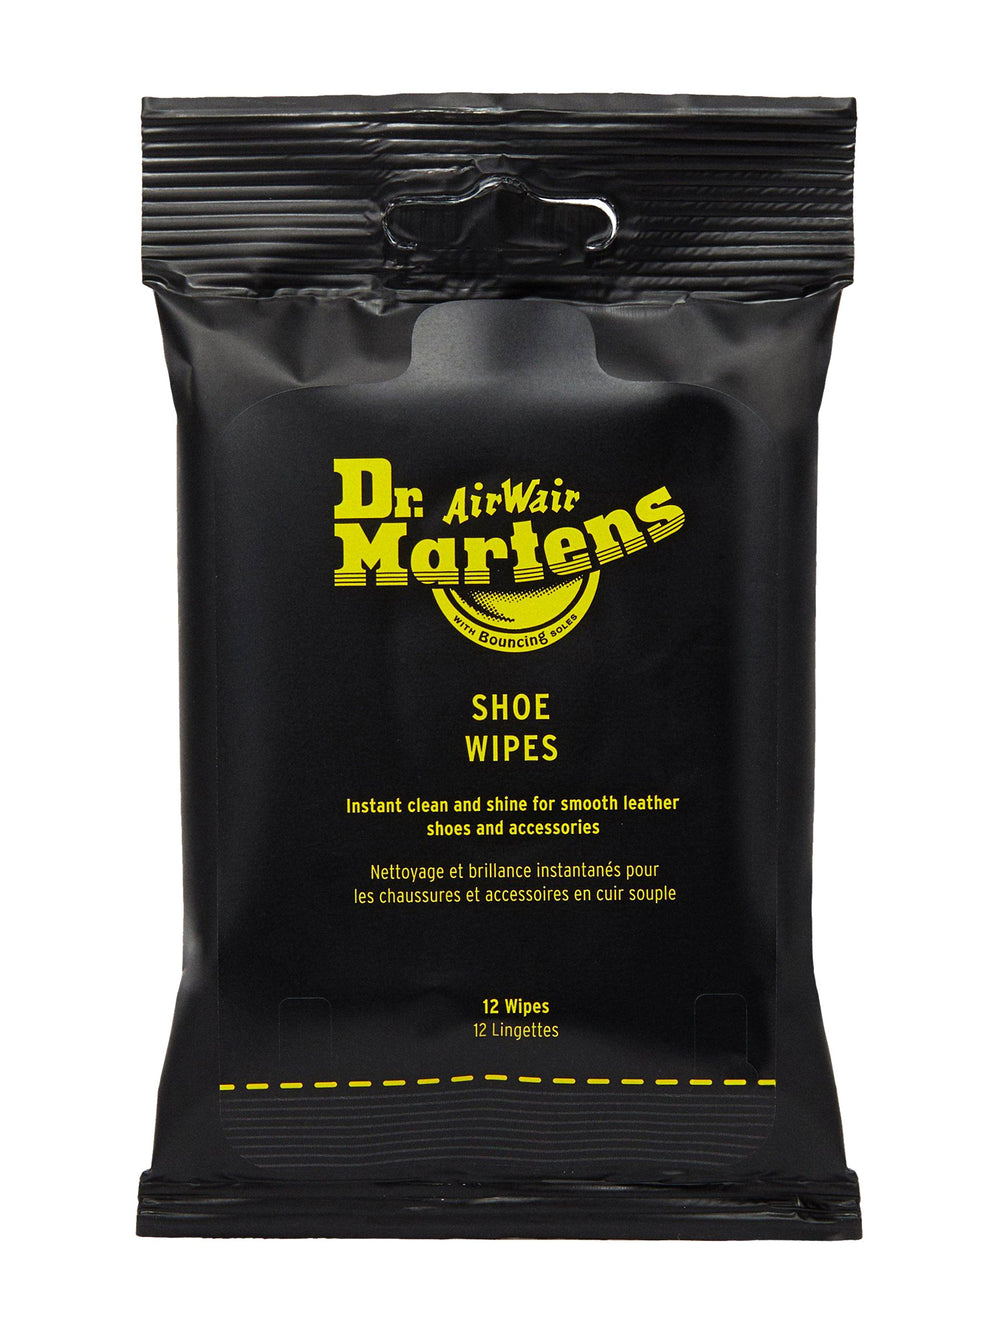 DR MARTENS SHOE WIPES - CLEARANCE